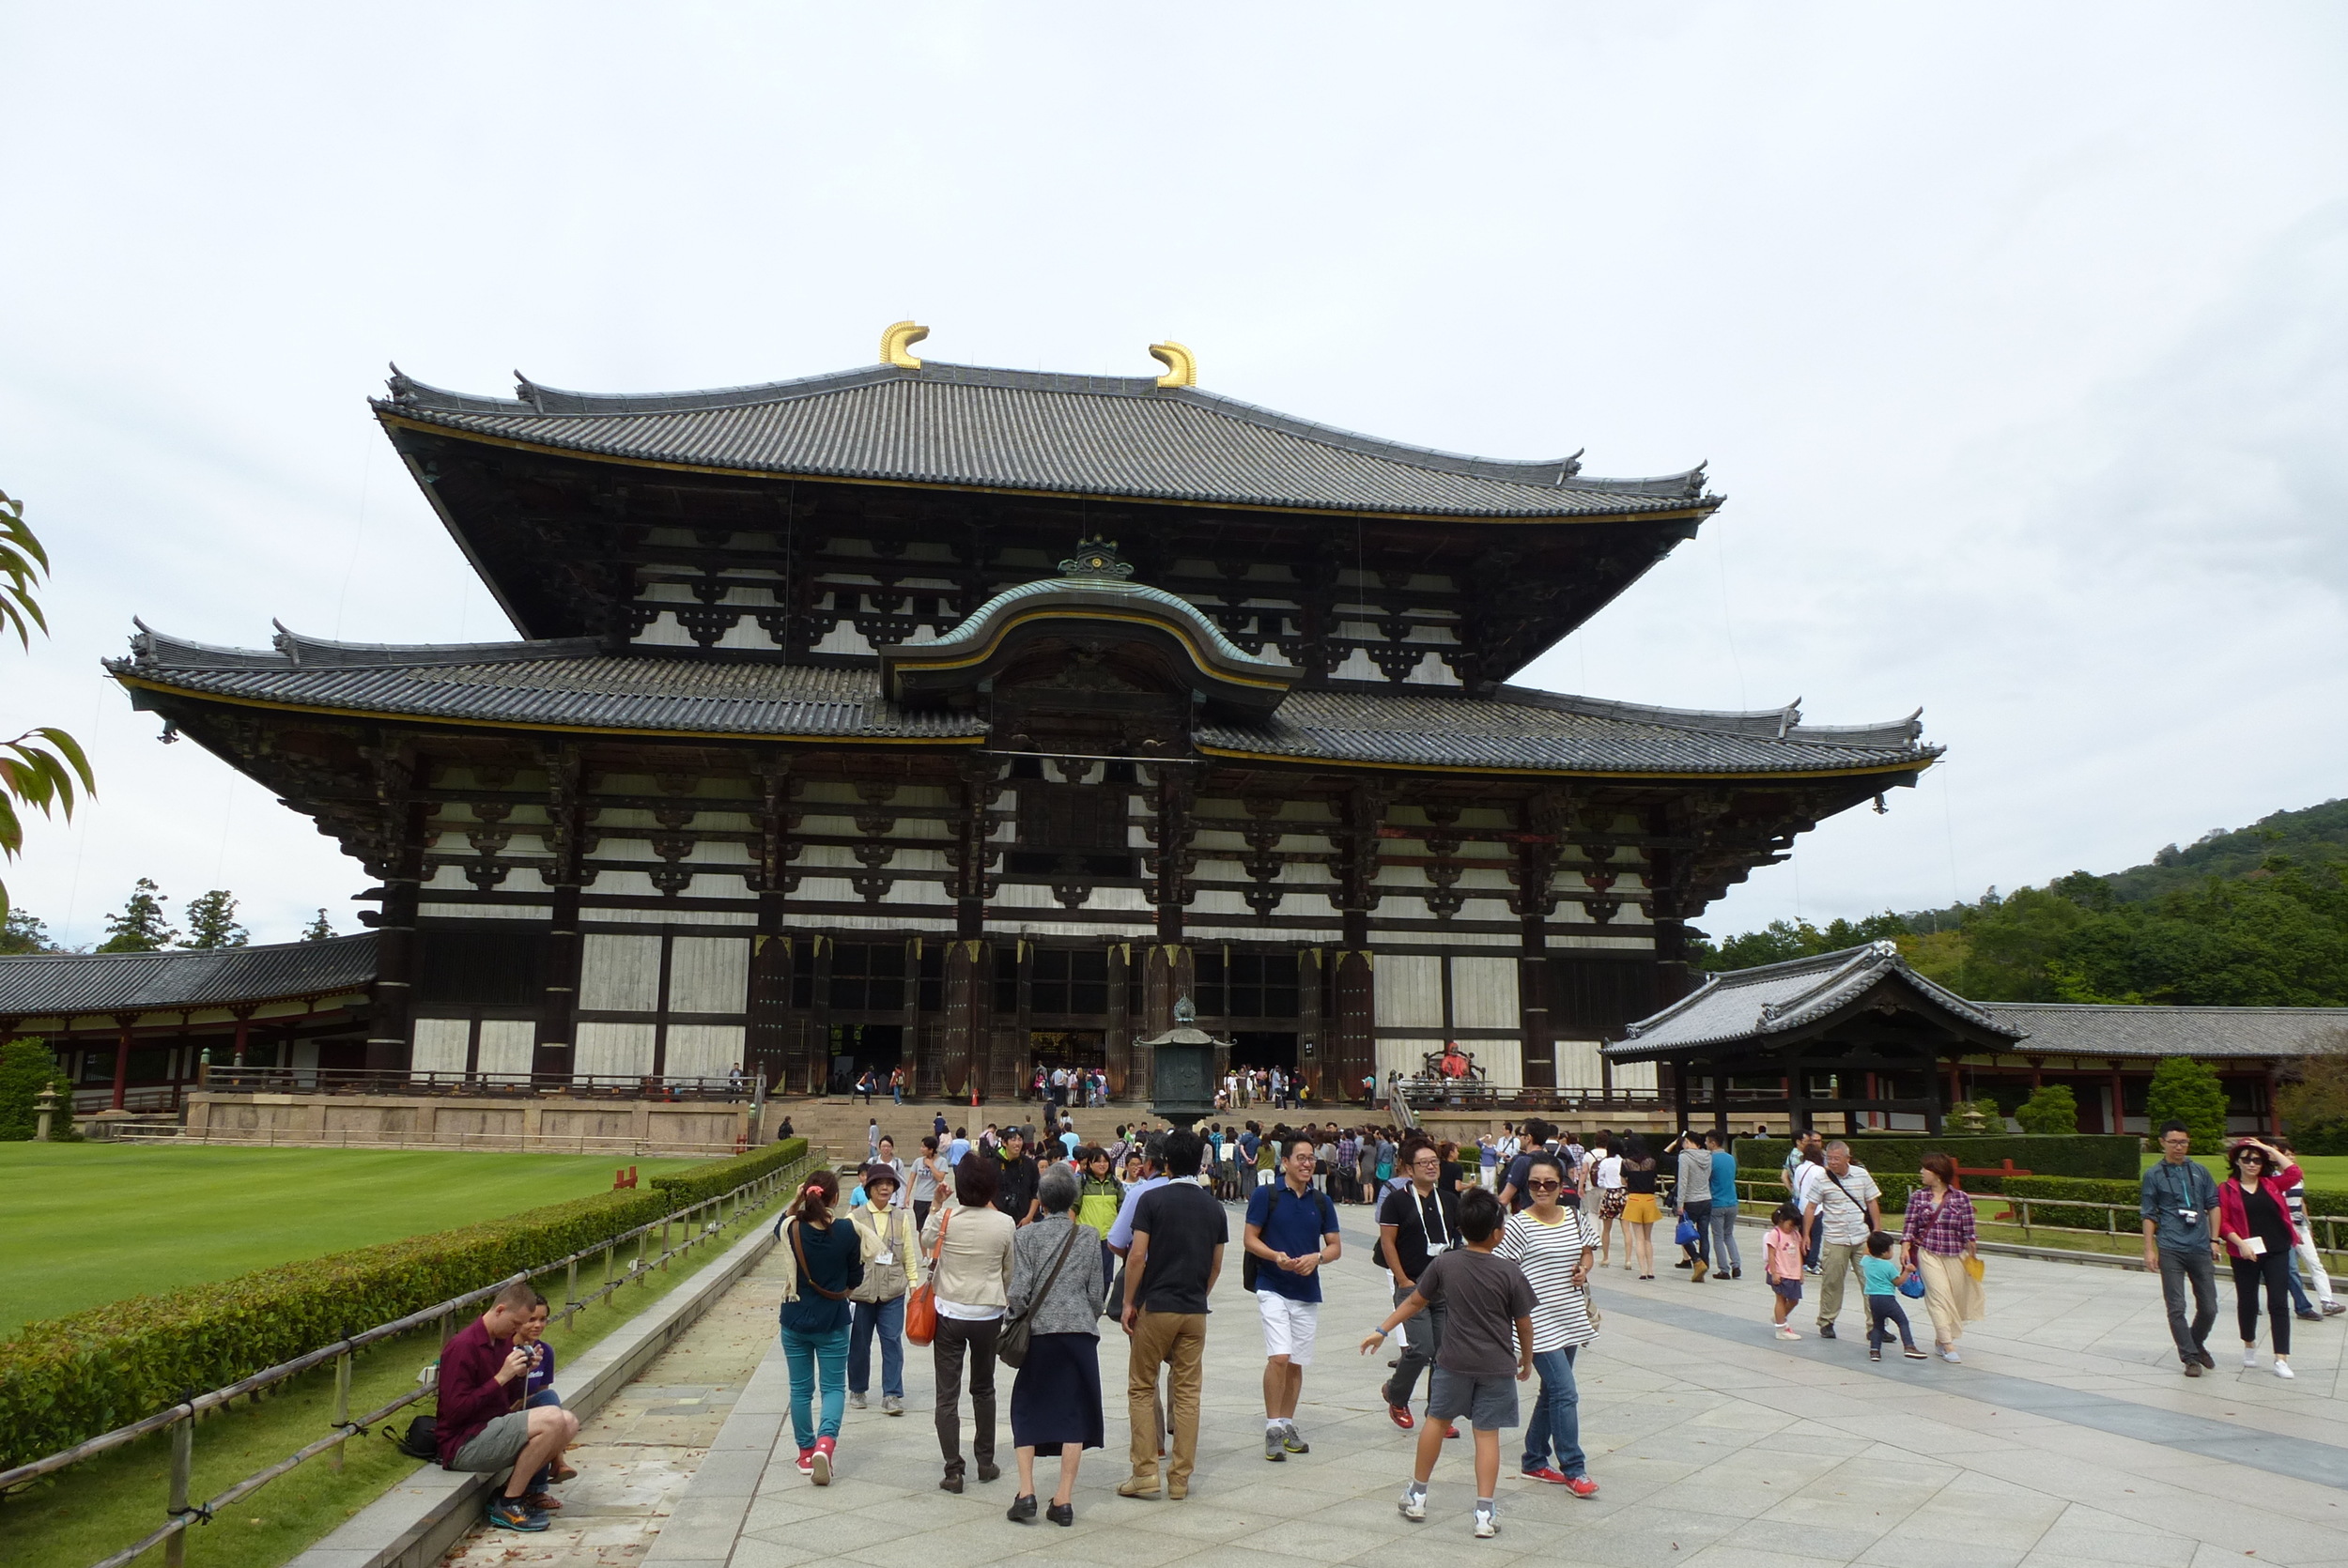 Todaiji Temple, home of the Big Buddha and the world's largest wooden building